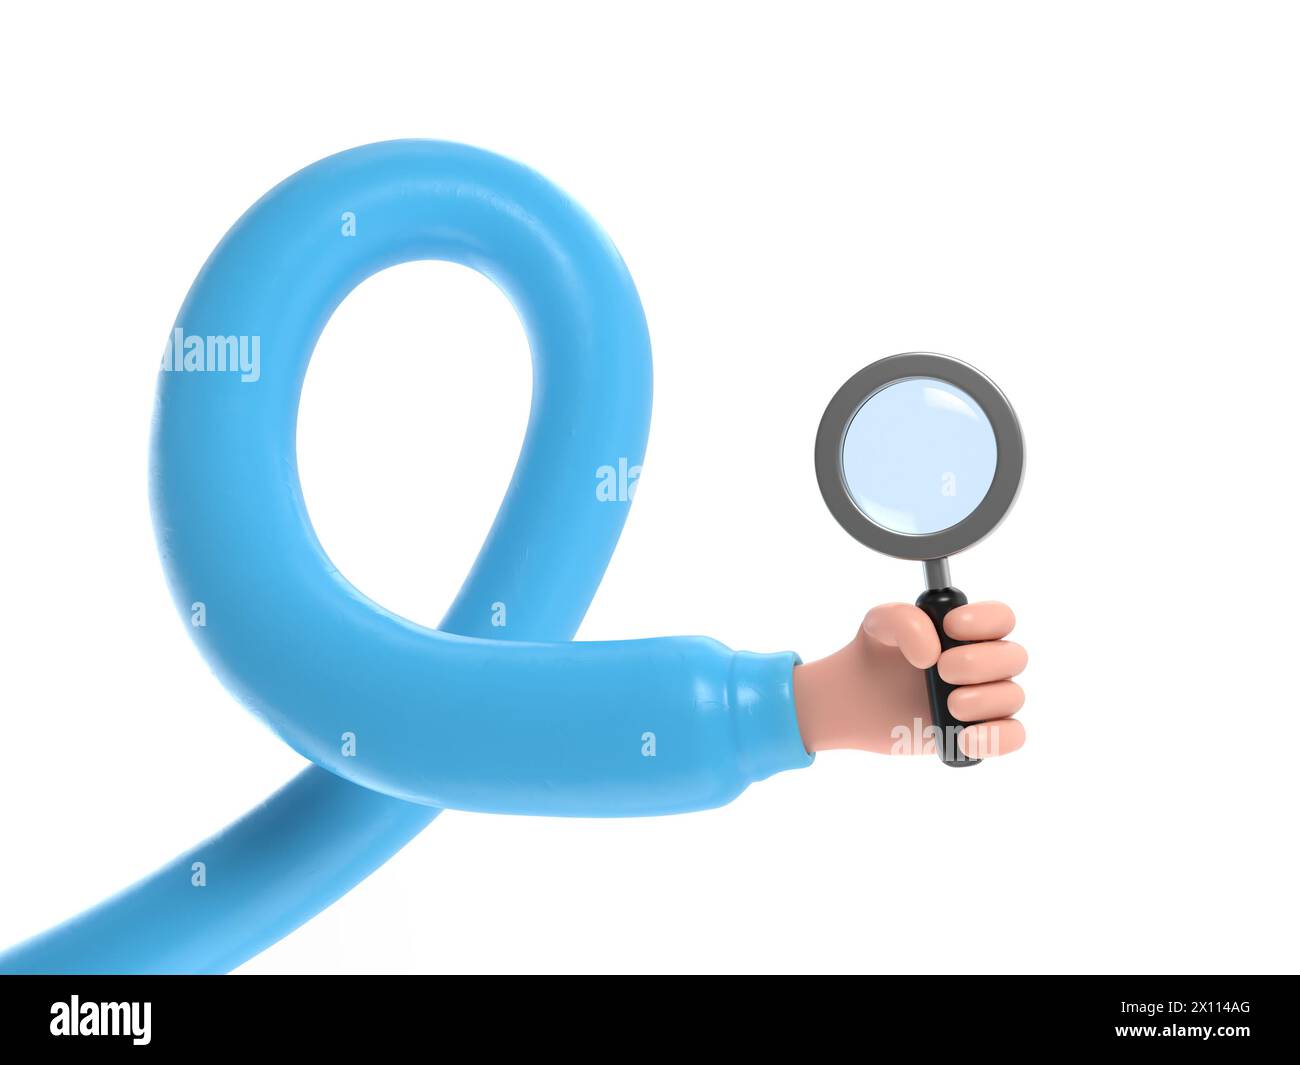 Cartoon Gesture Icon Mockup.Cartoon character hand in medical glove holding magnifier.3D rendering on white background.long arms concept. Stock Photo